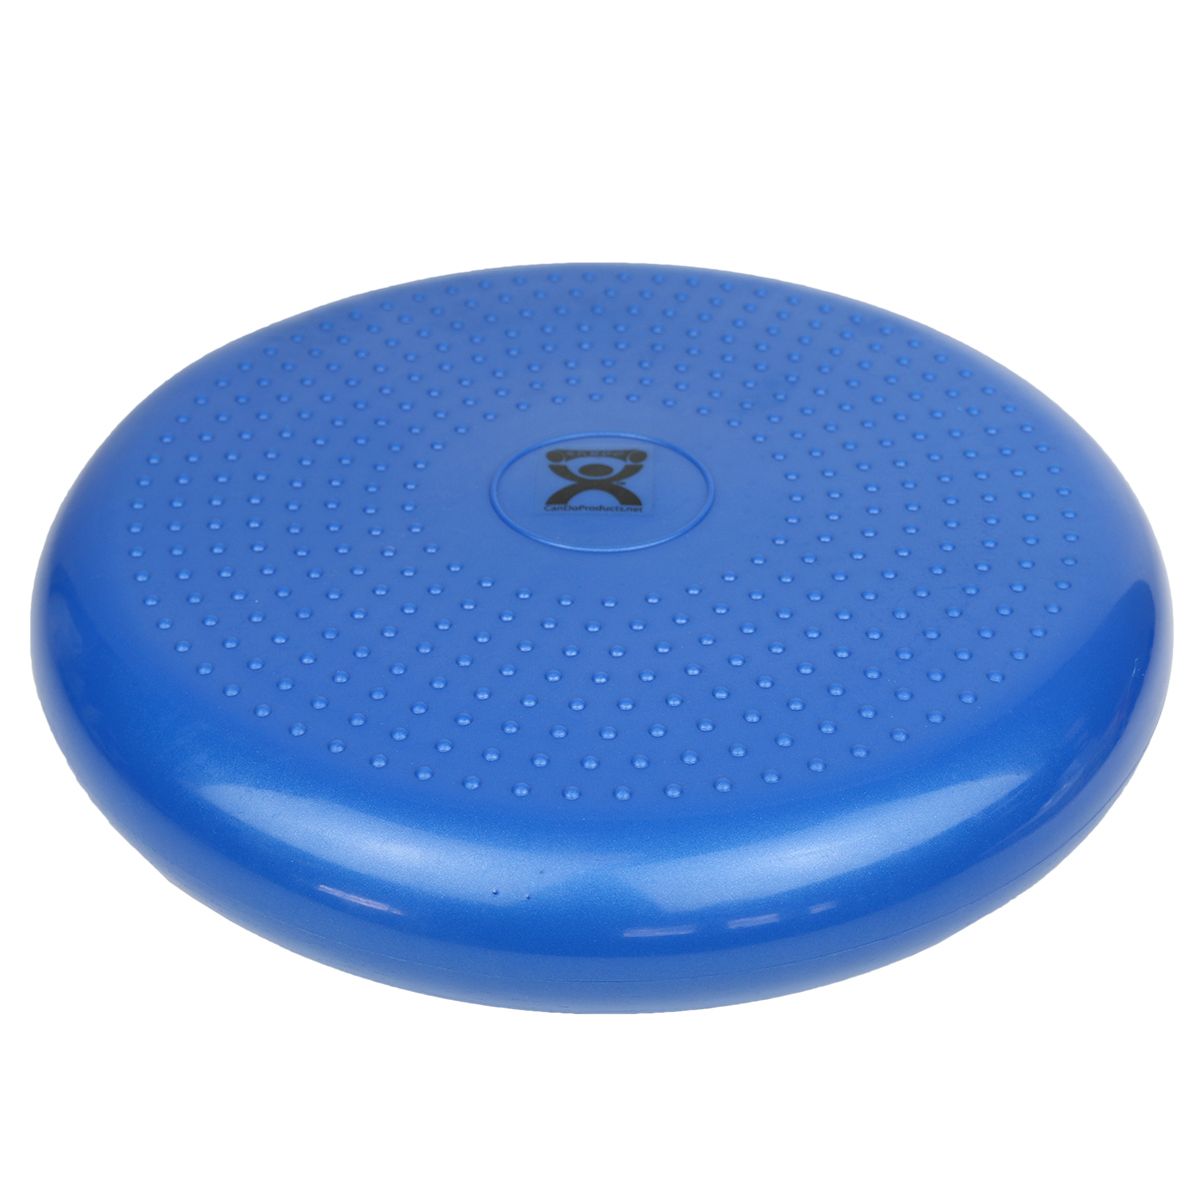 Cando Inflatable vestibular seating/standing disc, blue, 35 cm (13.8 in)